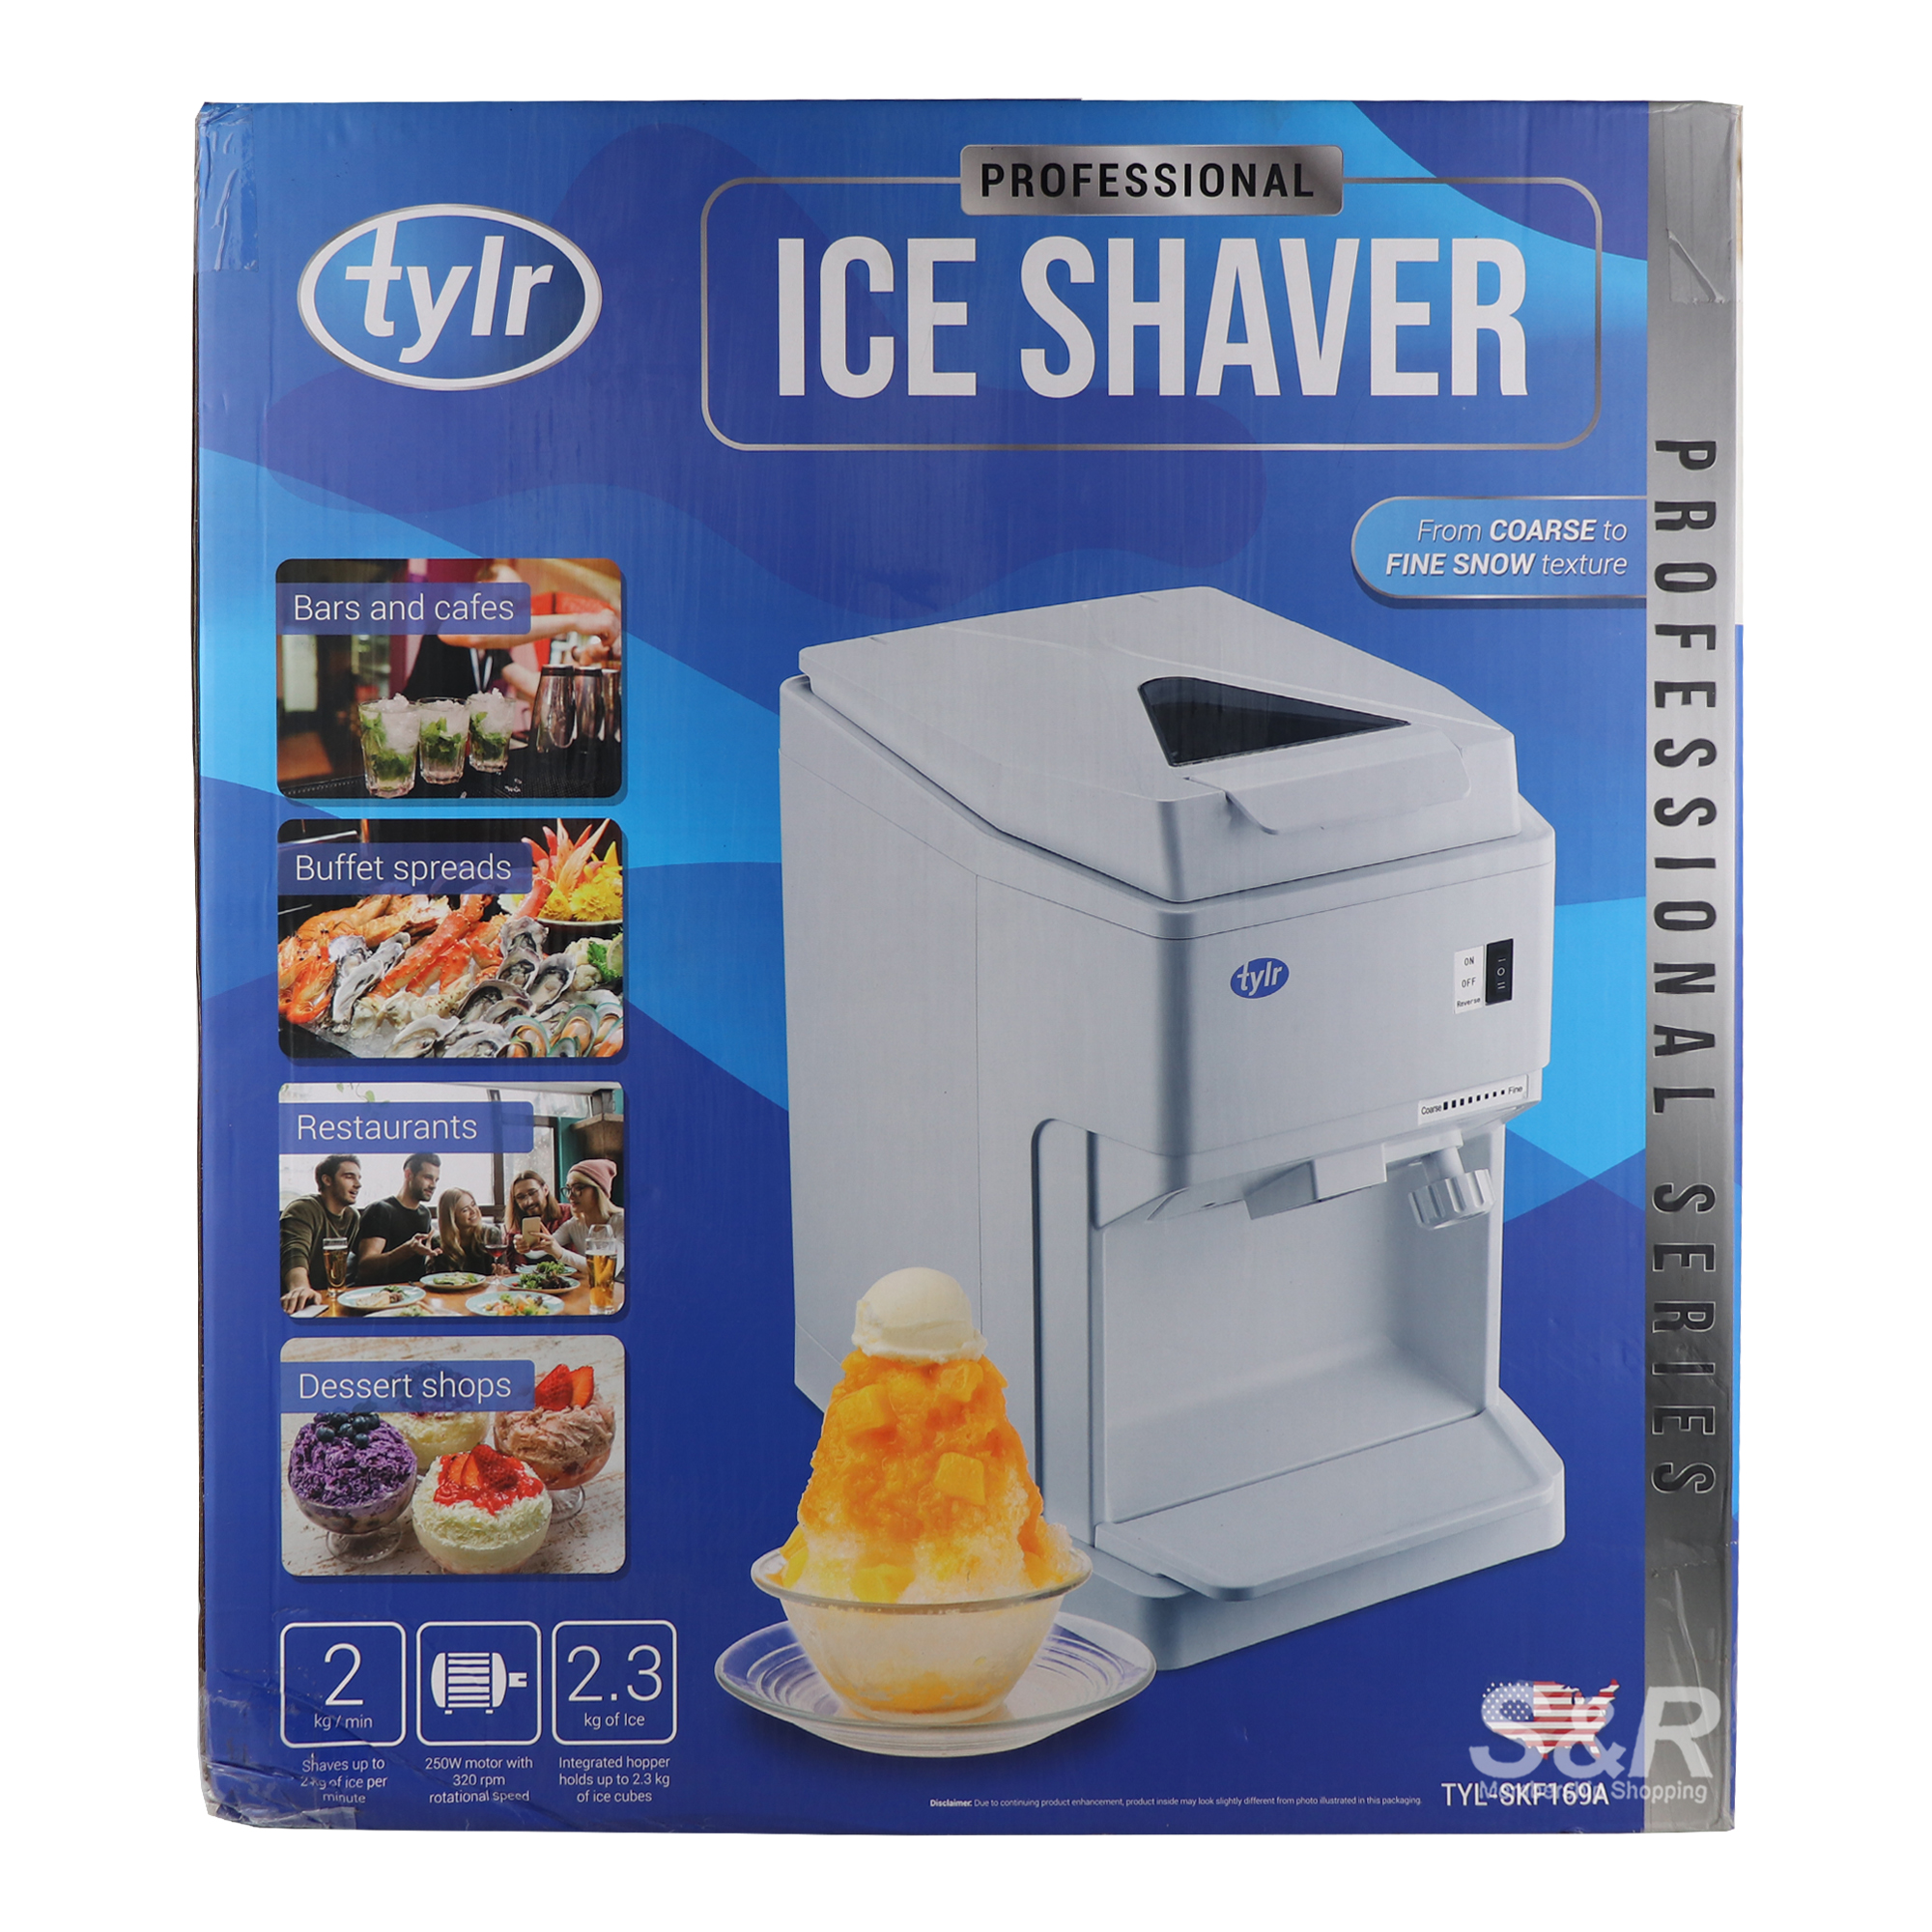 Tylr Professional Ice Shaver TYL-SKF169A